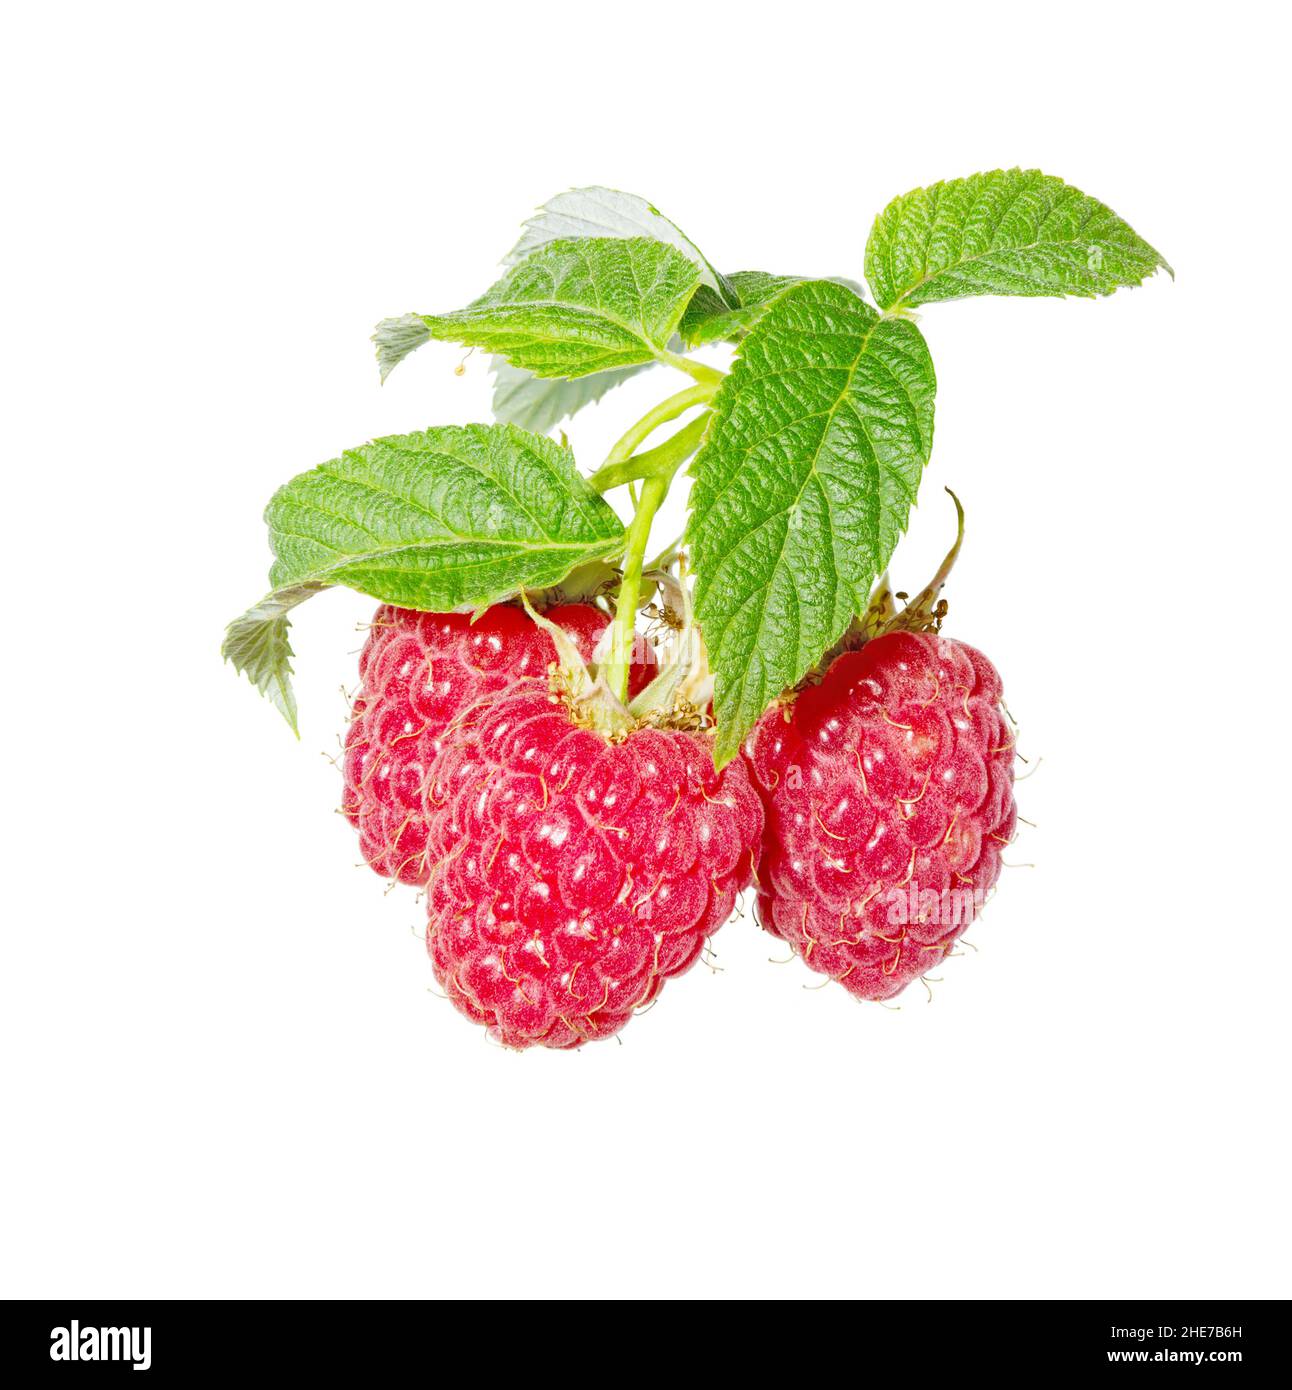 Raspberri berry with leaves isolated on white background. Ripe red raspberries  fruits close up. Collection. Stock Photo